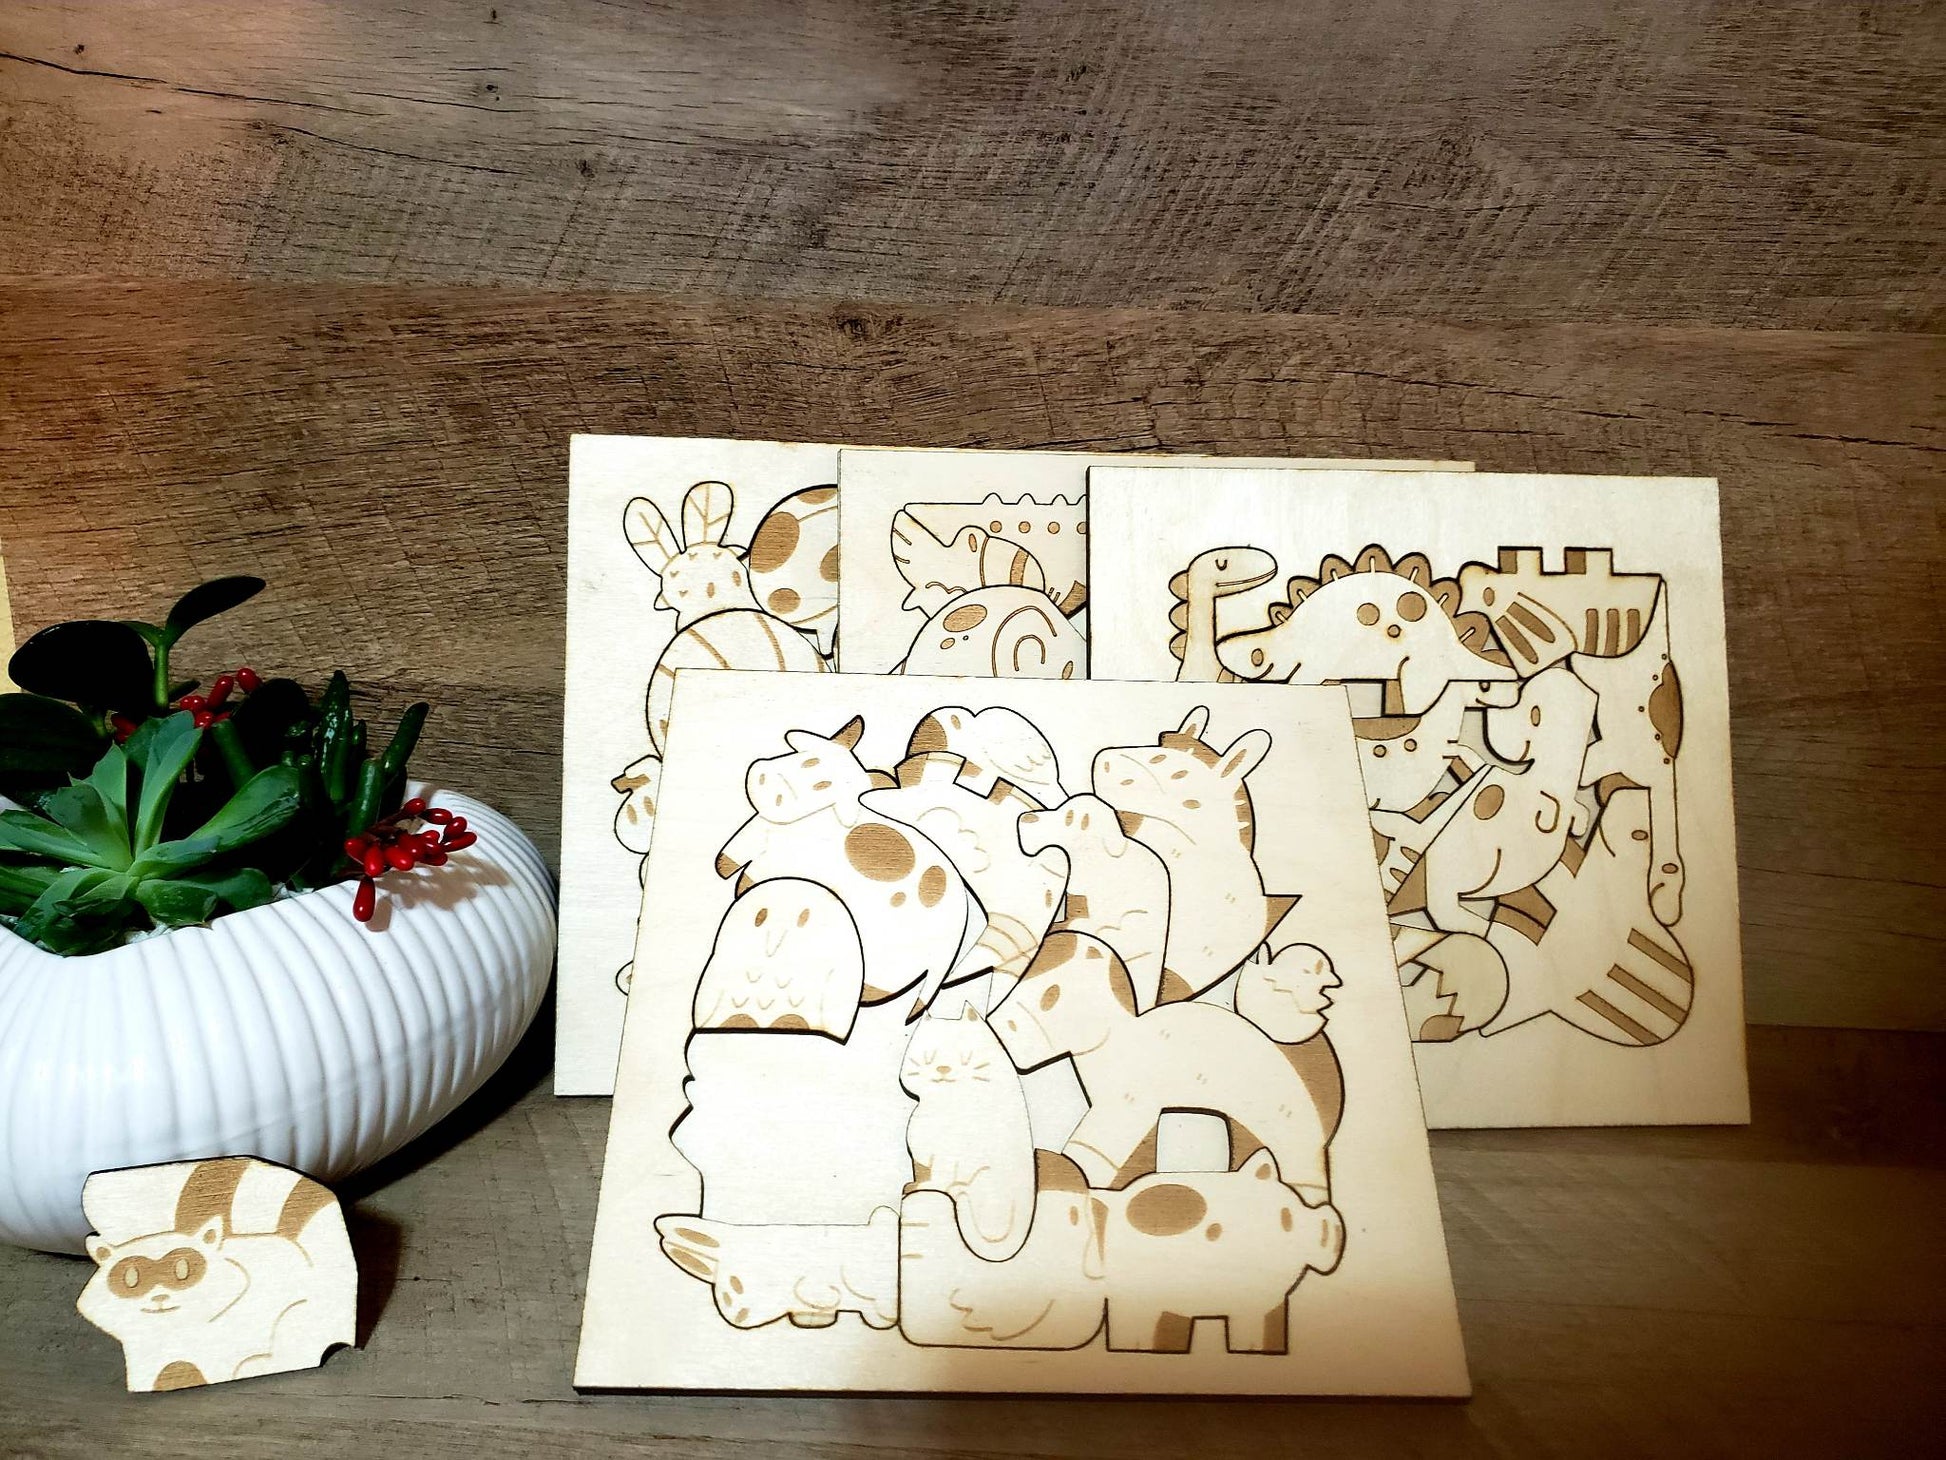 These 10" x 10" Childrens Wooden Animal Puzzles are an eye-catching educational game for kids. They feature laser-cut images of animals from the jungle, farm, and insect kingdom, as well as dinosaurs. Expertly crafted from birch wood, each piece fits snugly into the board for an enjoyable playtime experience. It takes 5-7 days to ship.